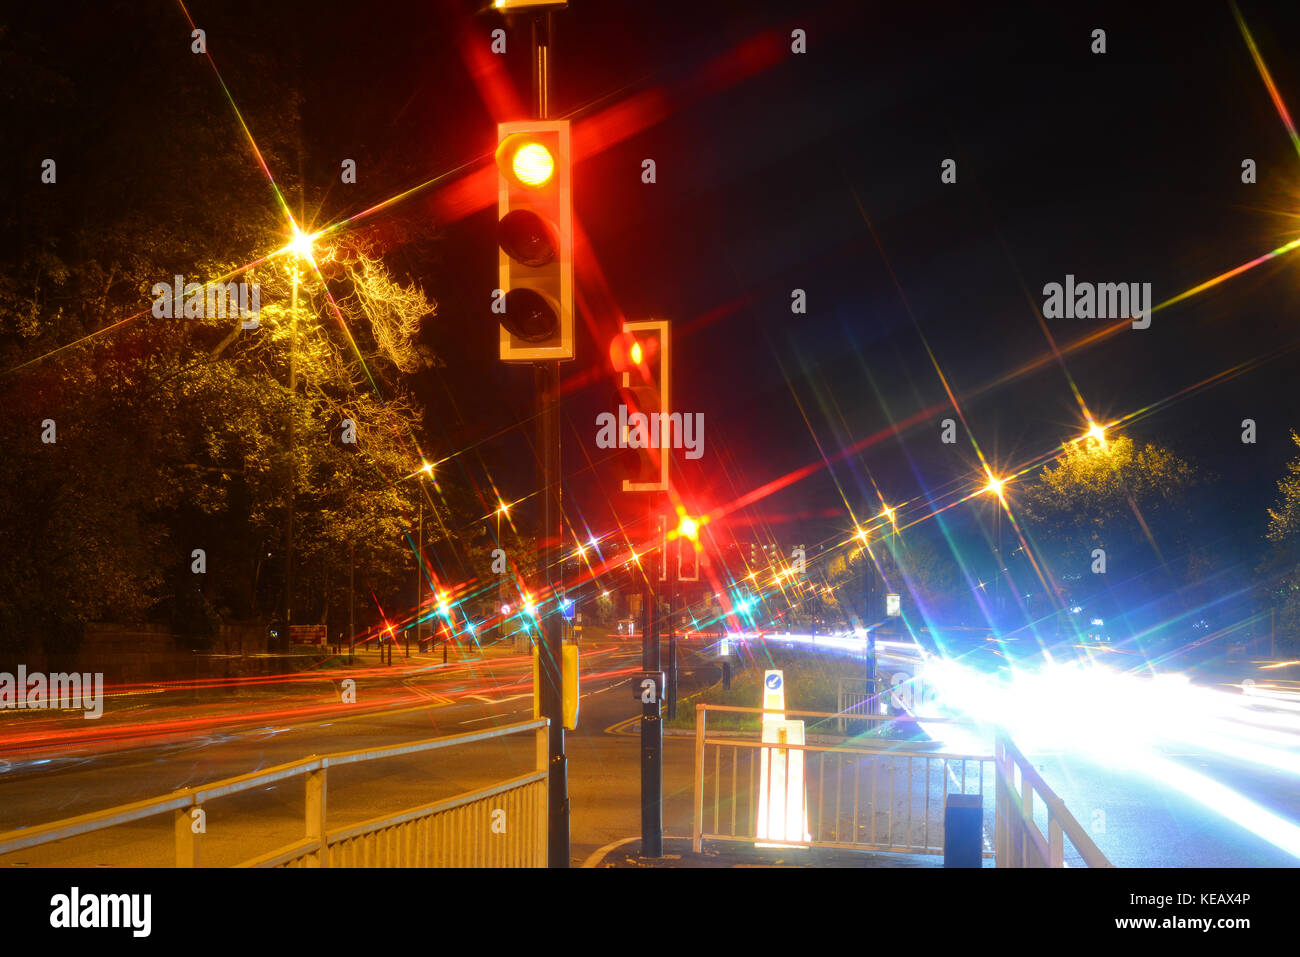 time exposure red stop traffic light at night leeds united kingdom Stock Photo